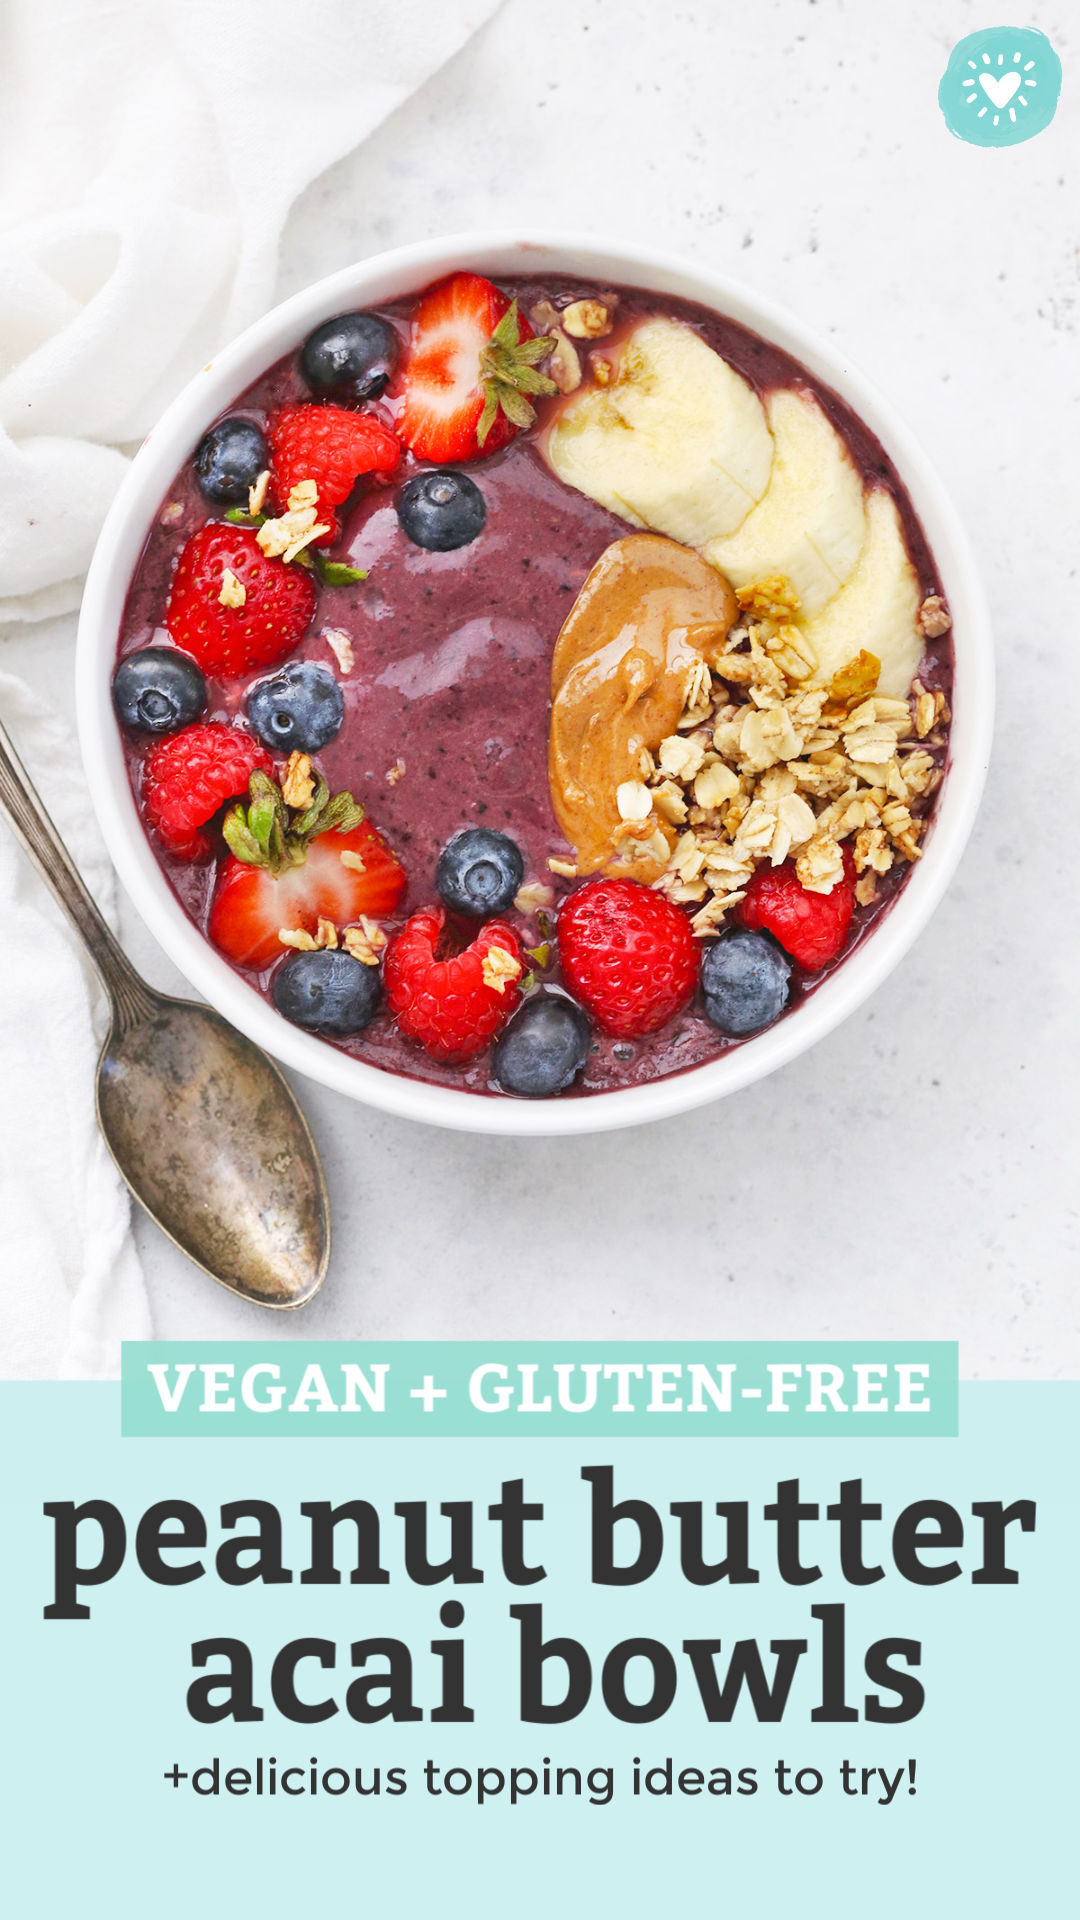 peanut Butter Acai Bowl topped with fresh berries, peanut butter, banana, and granola with text overlay that reads "Vegan + Gluten-Free Peanut Butter Acai Bowls +Delicious Topping Ideas to Try!"